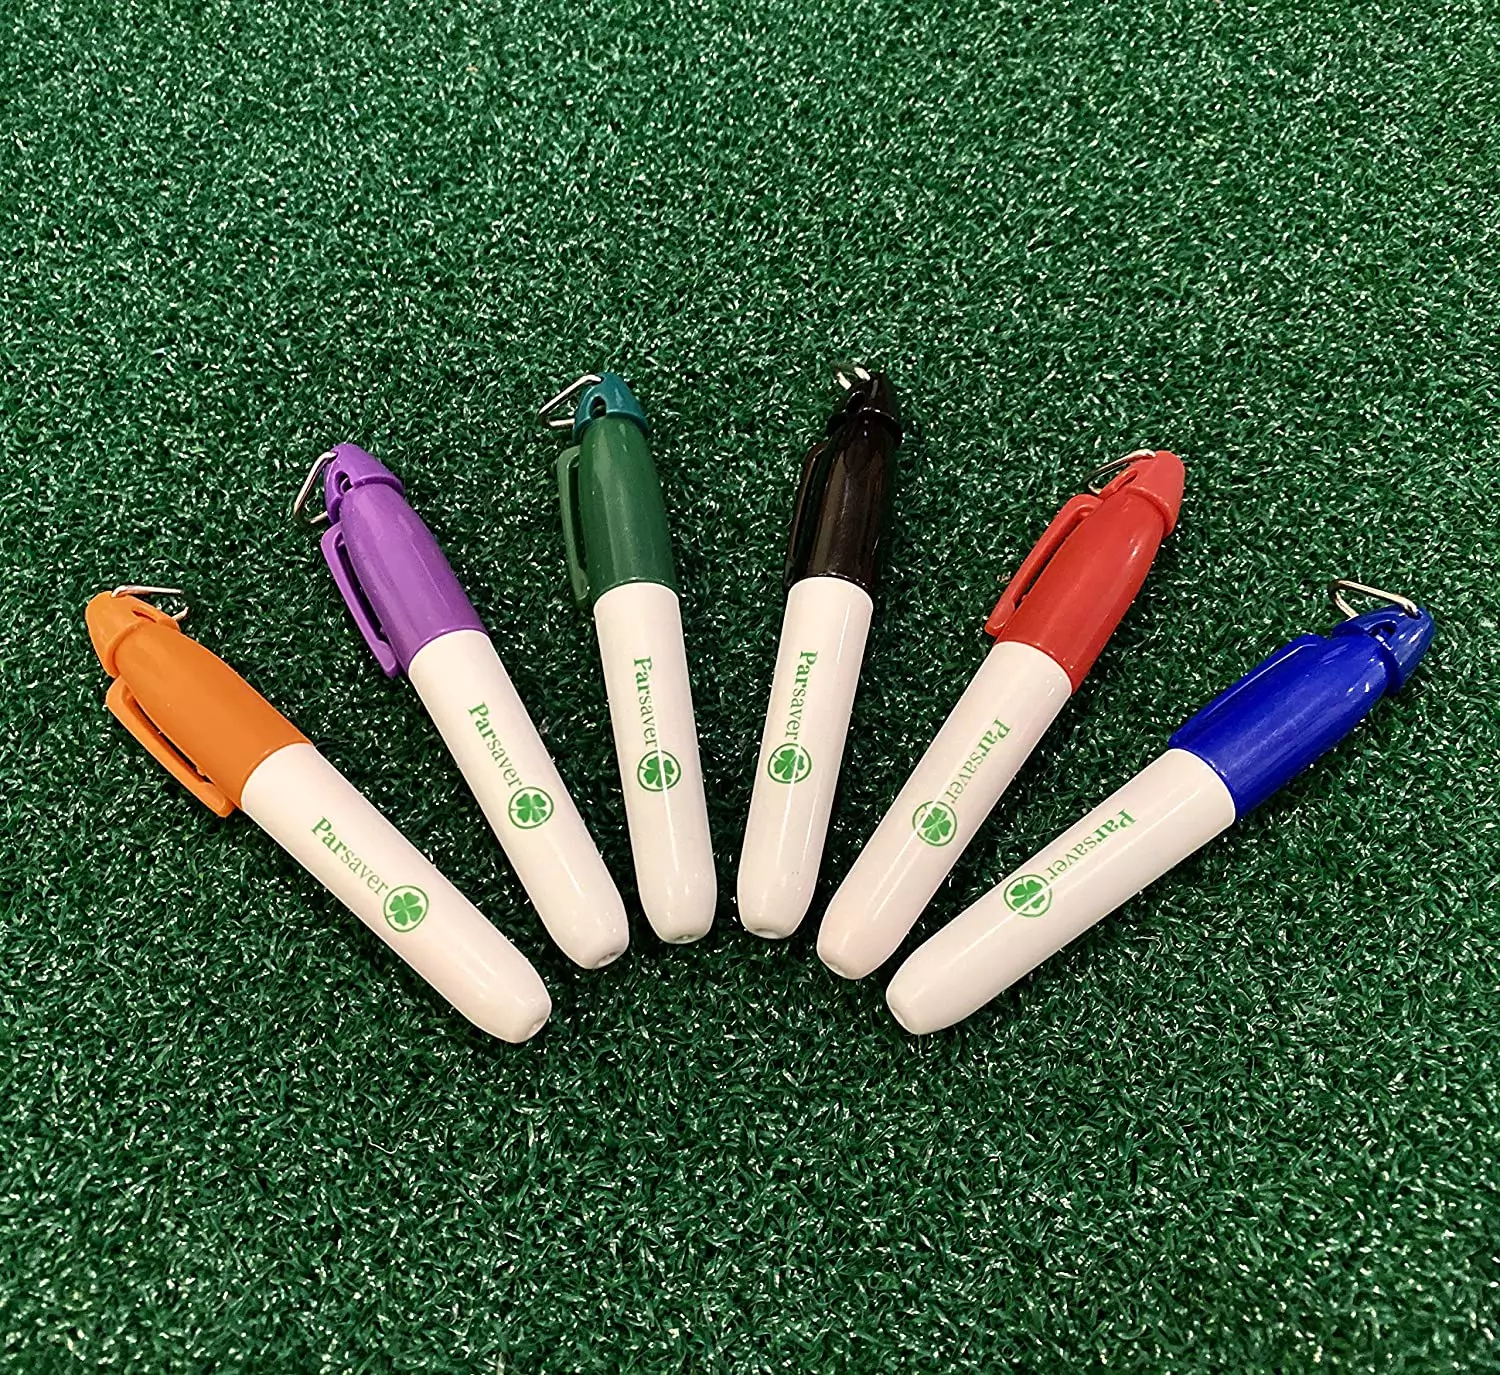 Parsaver PARTEE Mini Golf Ball Markers come with 6 different colors that are a perfect size for marking your golf ball 